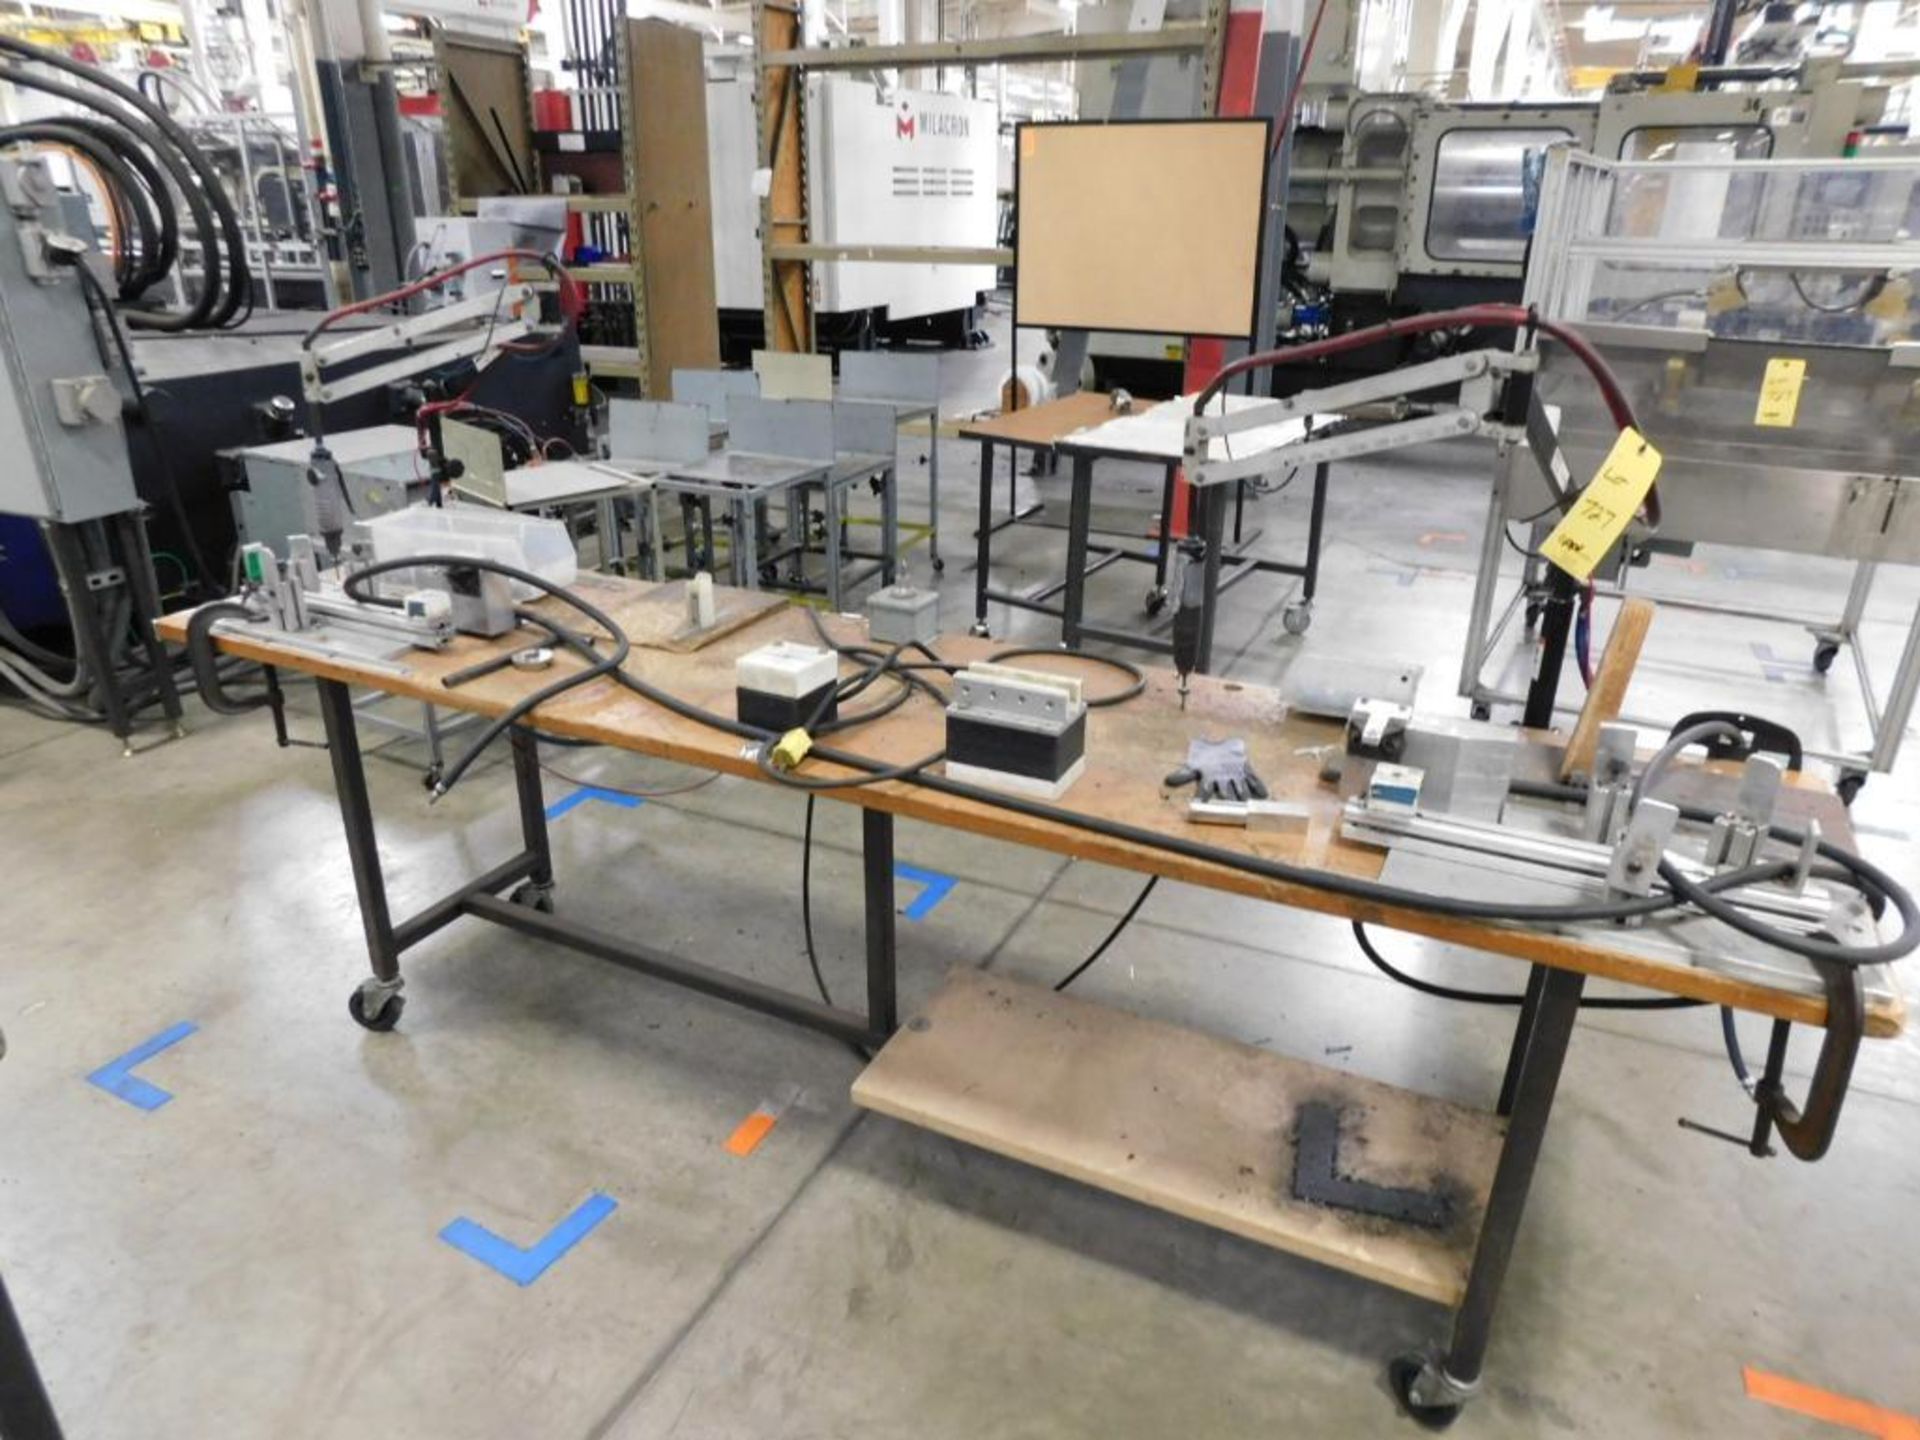 LOT: (8) Work Stations, (2) Punch Presses, (2) Drying Stations, Drilling Station, Glue Station, etc.